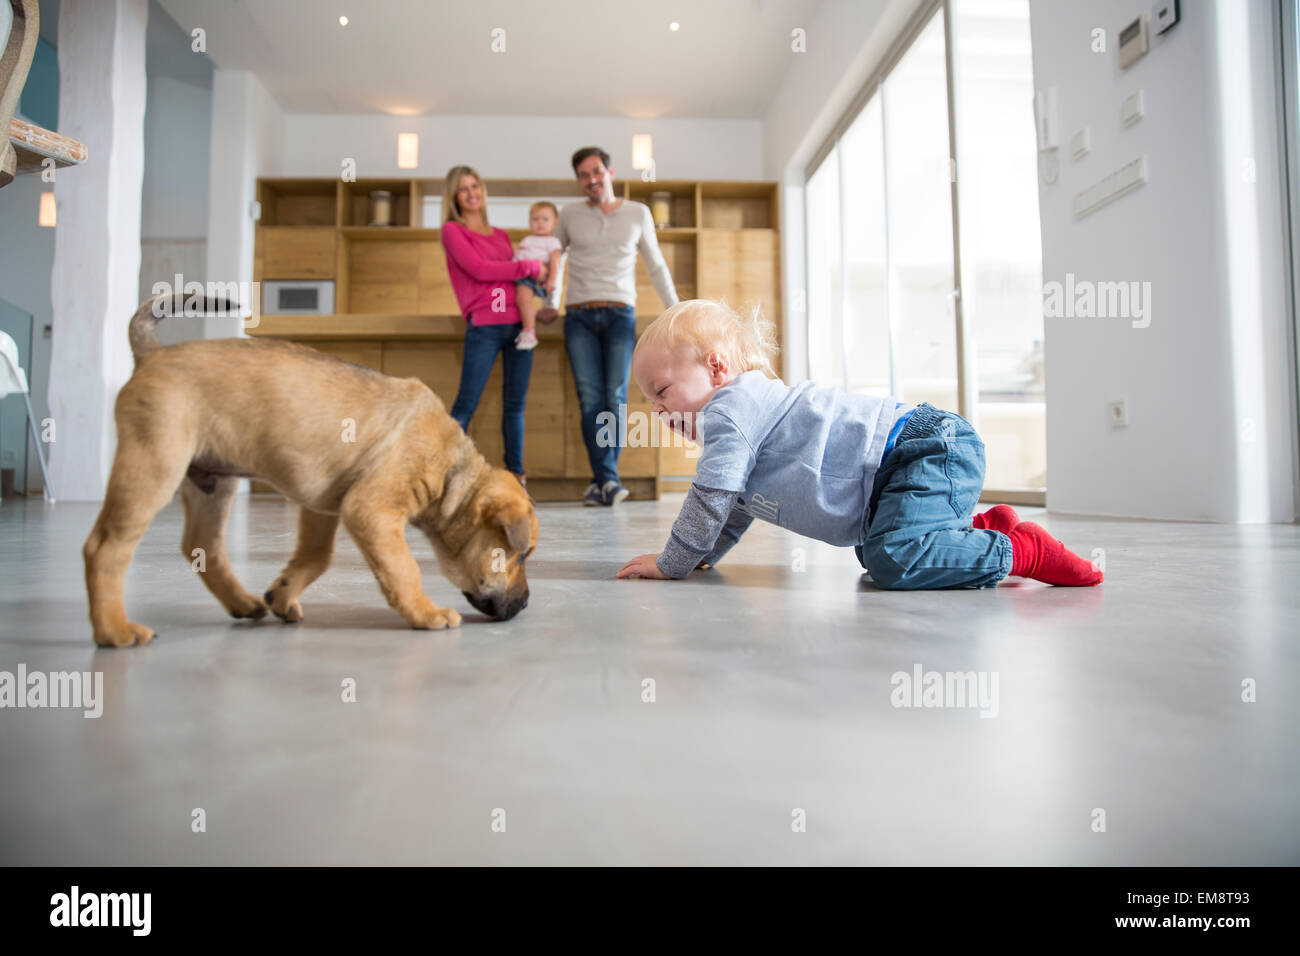 Male toddler playing with puppy on dining room floor Stock Photo